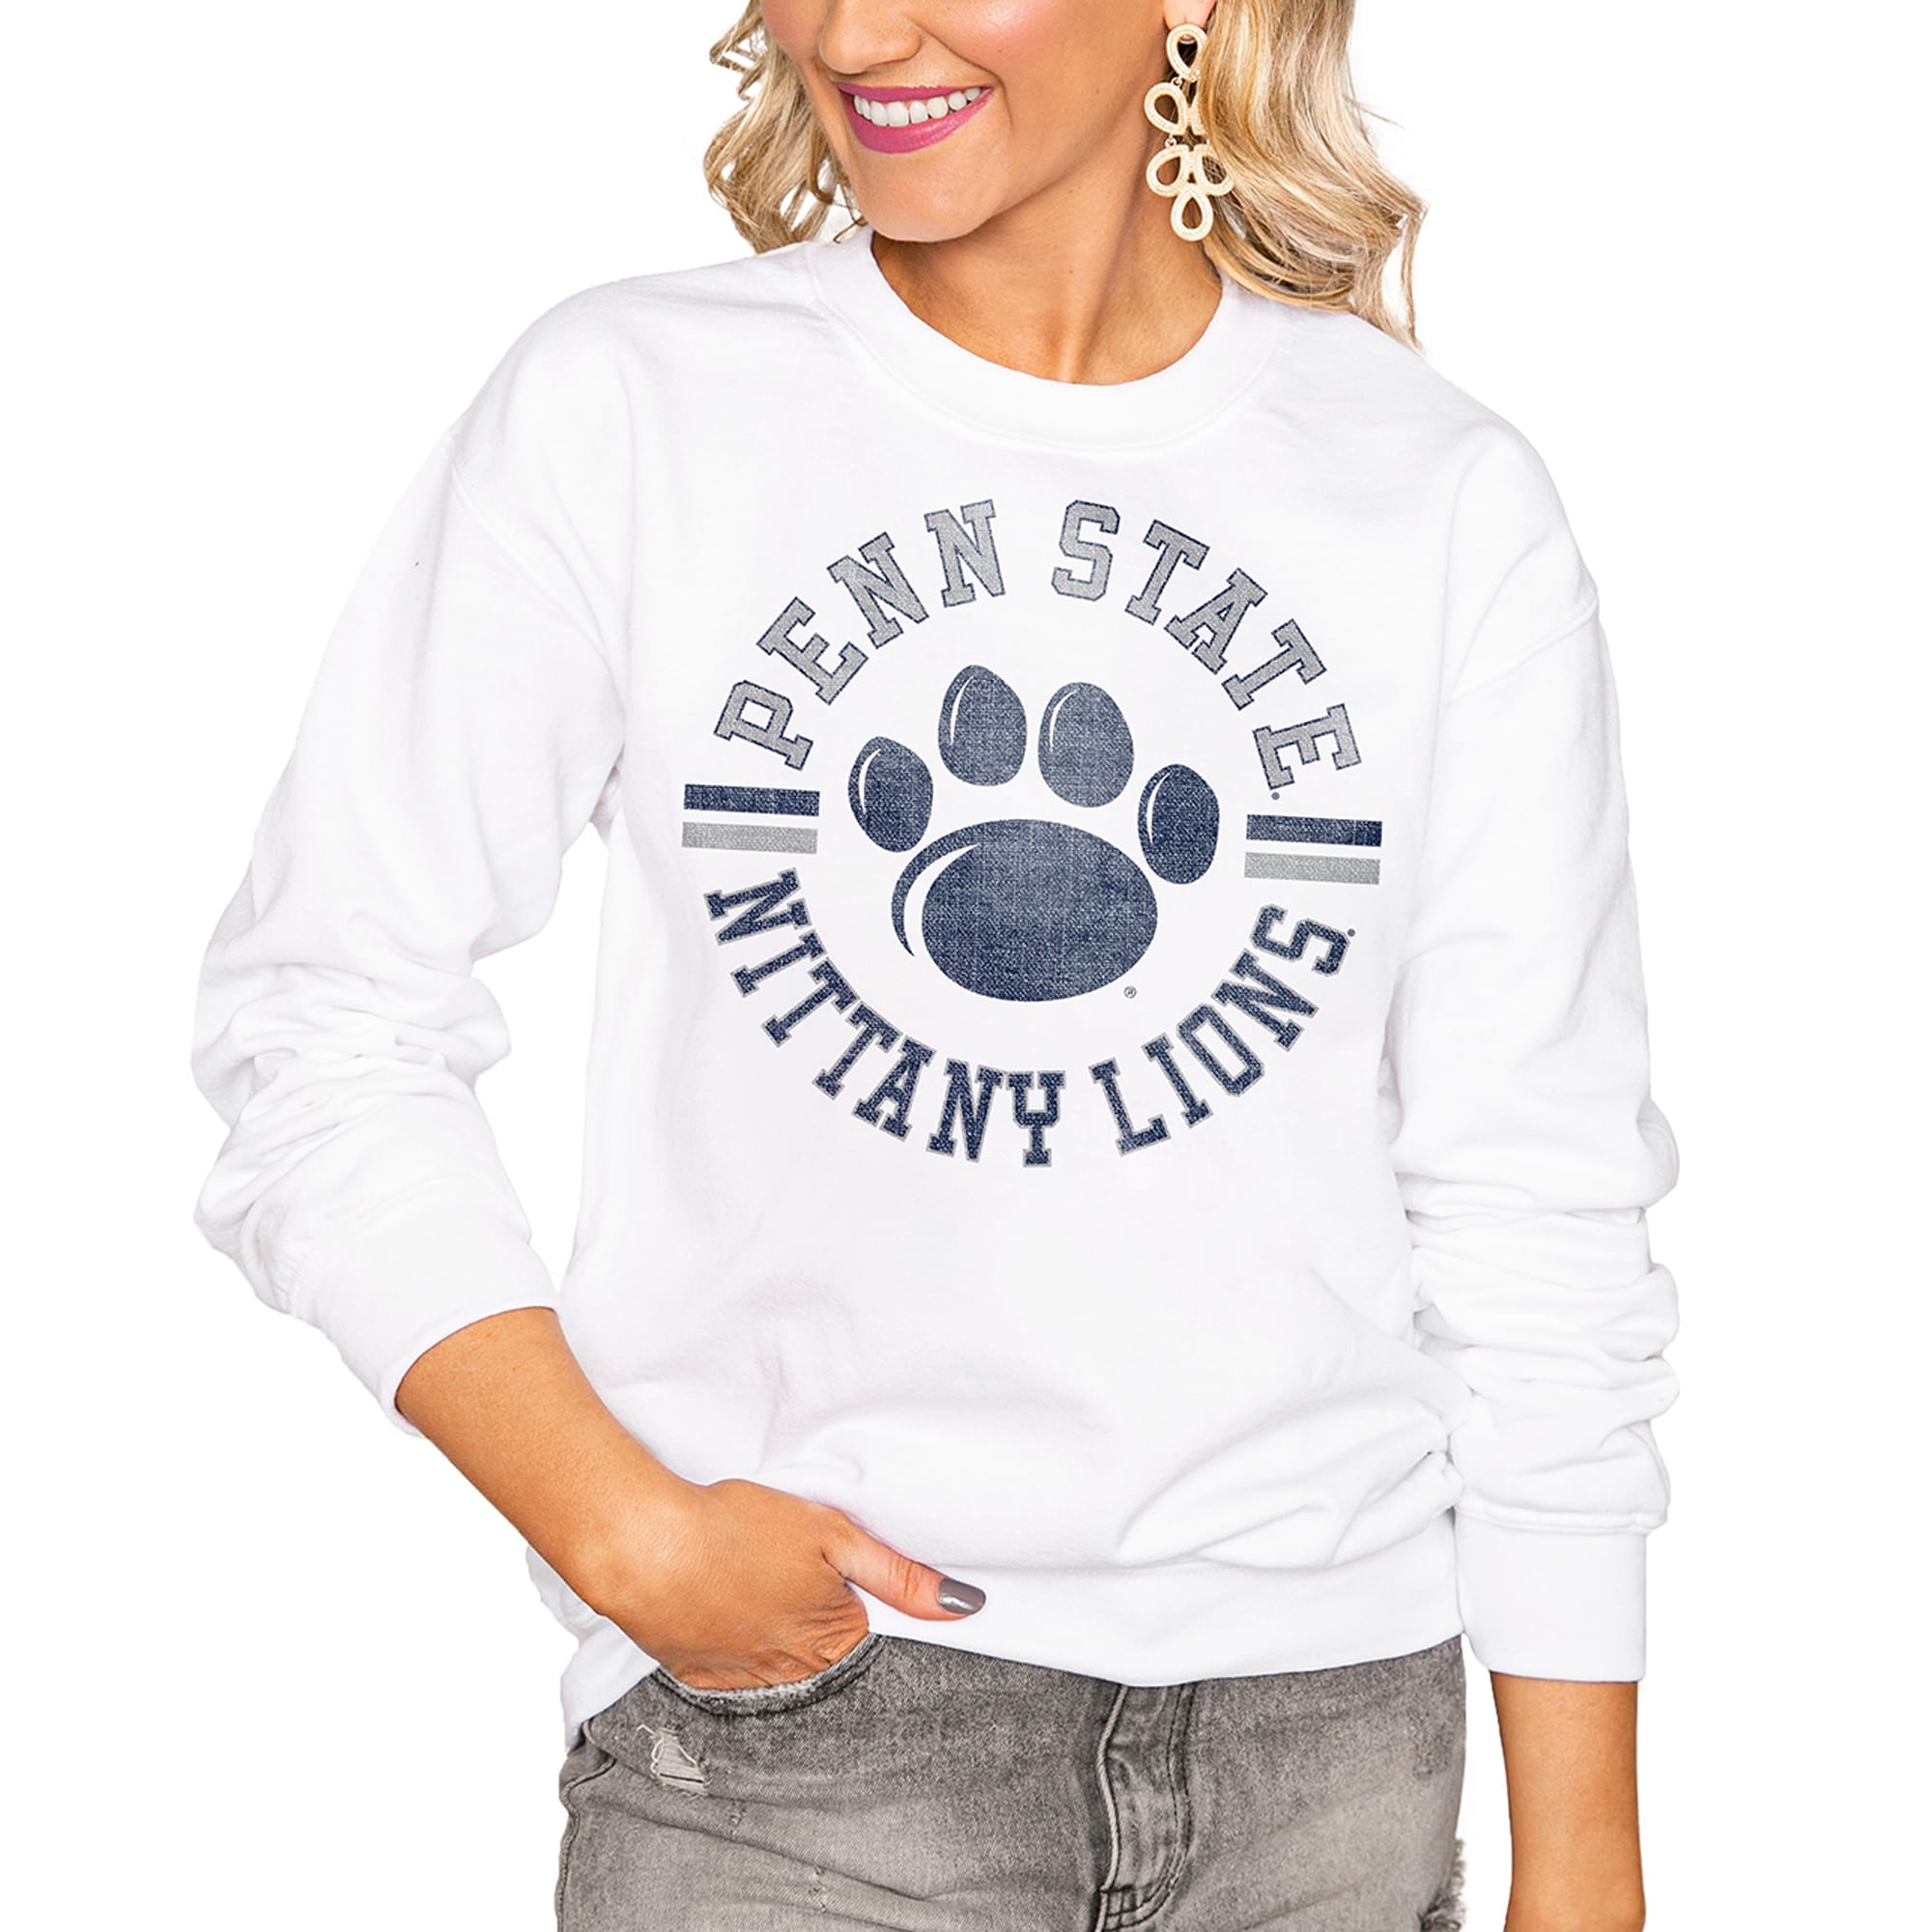 Women's White Penn State Nittany Lions Vintage Days Perfect Pullover Sweatshirt - image 1 of 1